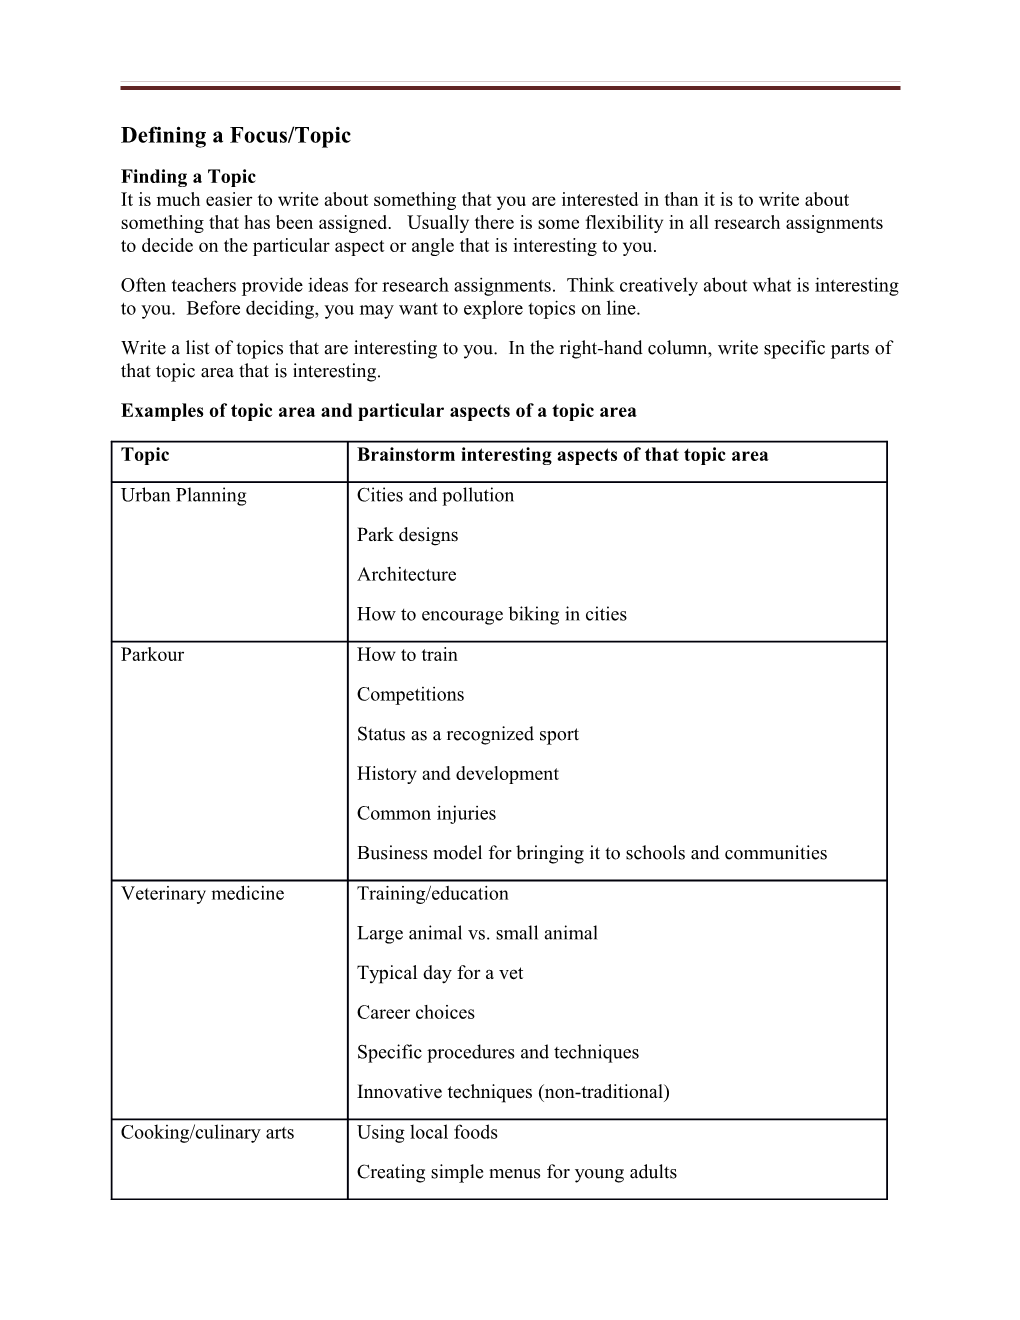 Examples of Topic Area and Particular Aspects of a Topic Area